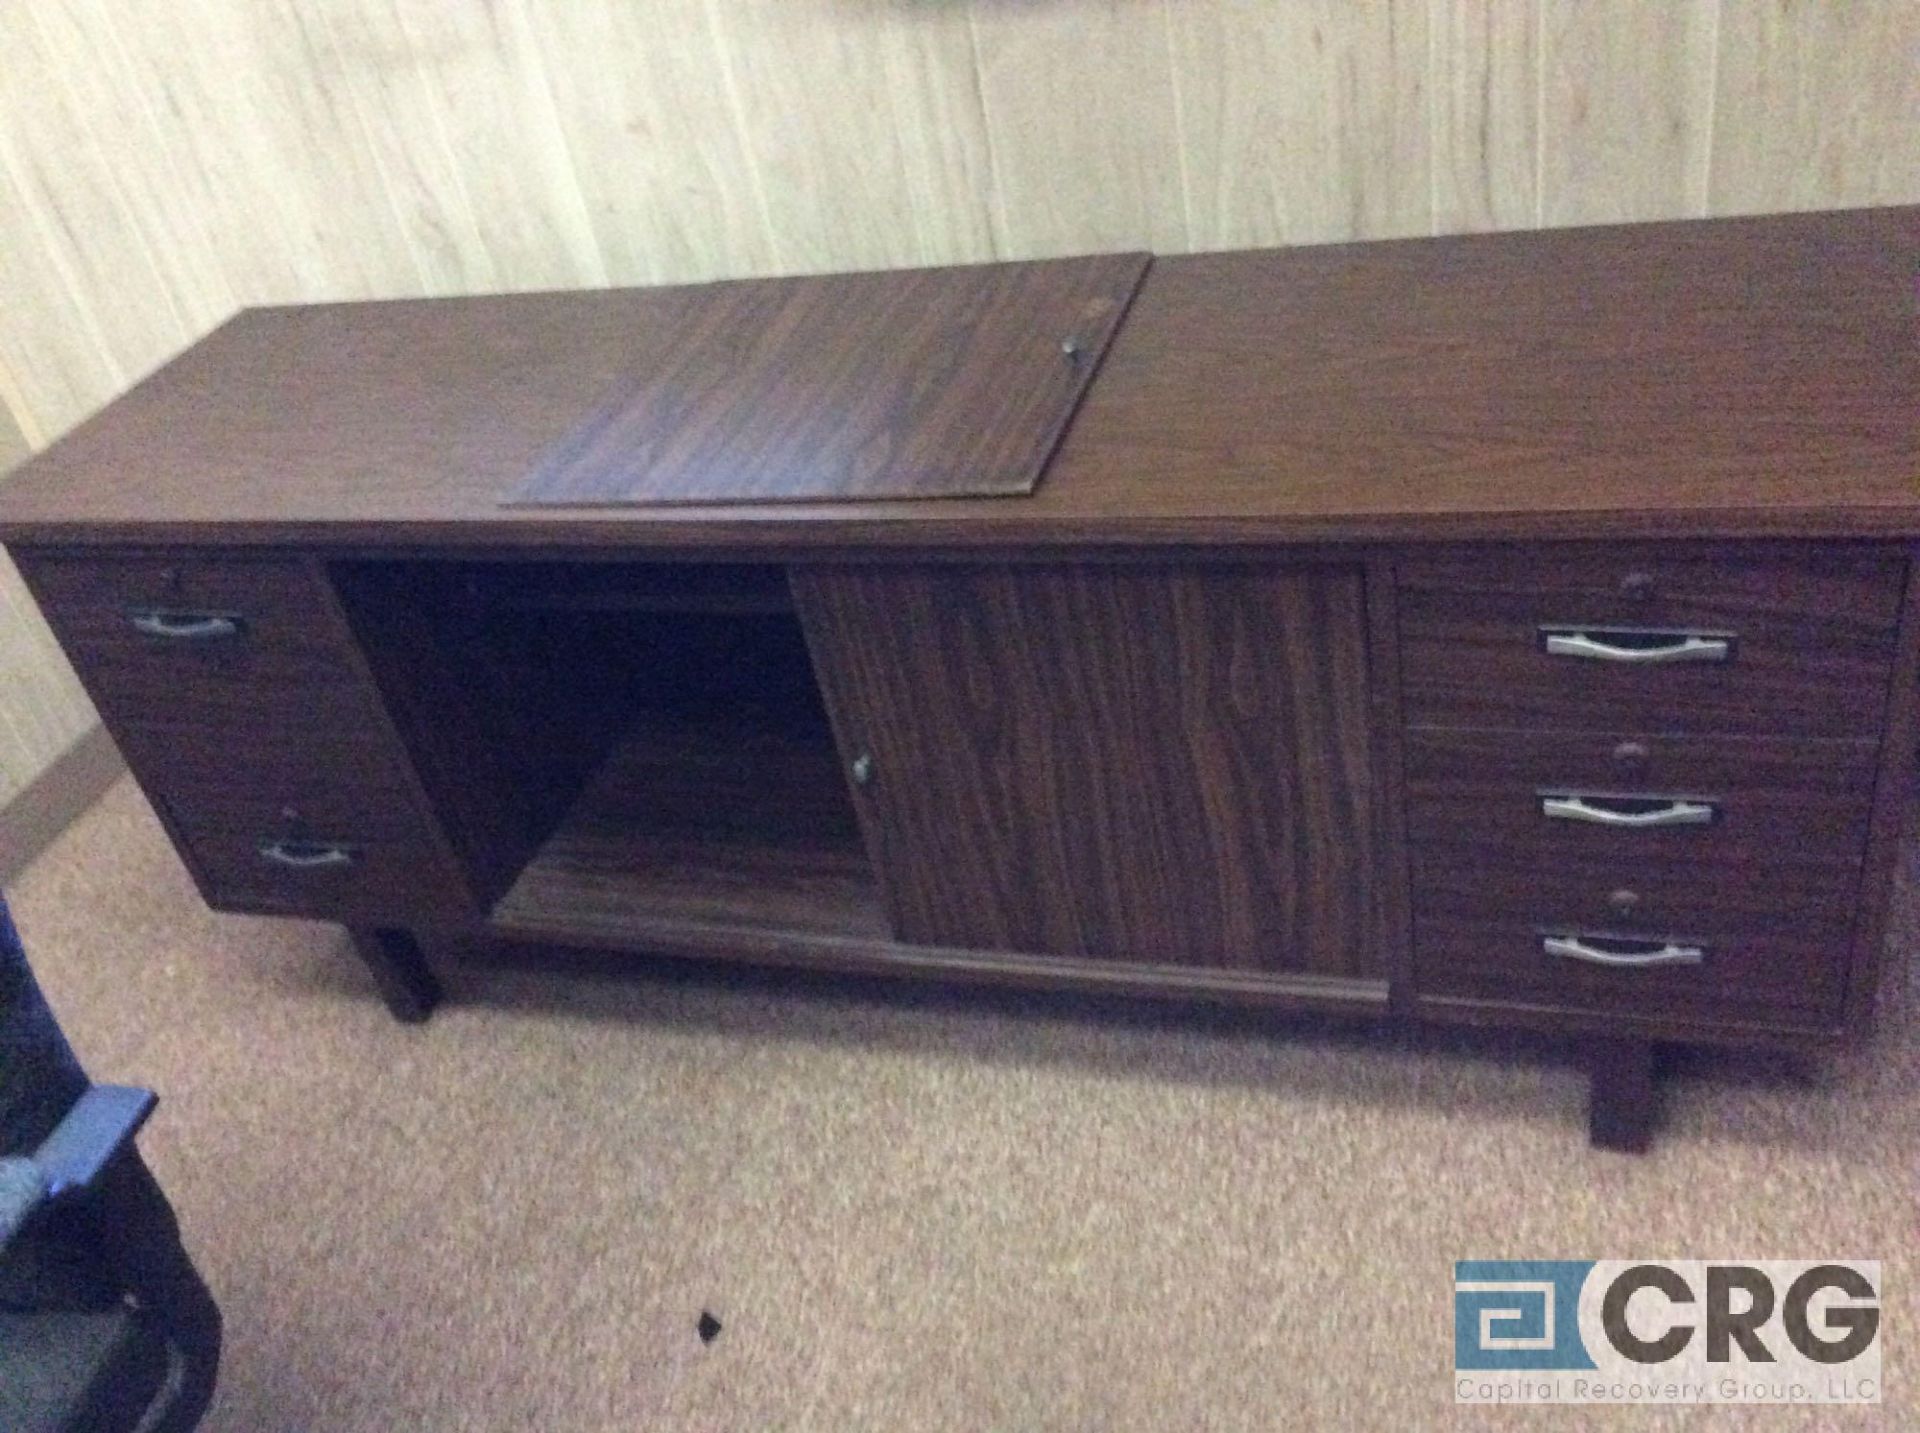 Lot of assorted office furnishings etc, including desks, chairs, file cabinets, bookcases etc, - Image 8 of 15